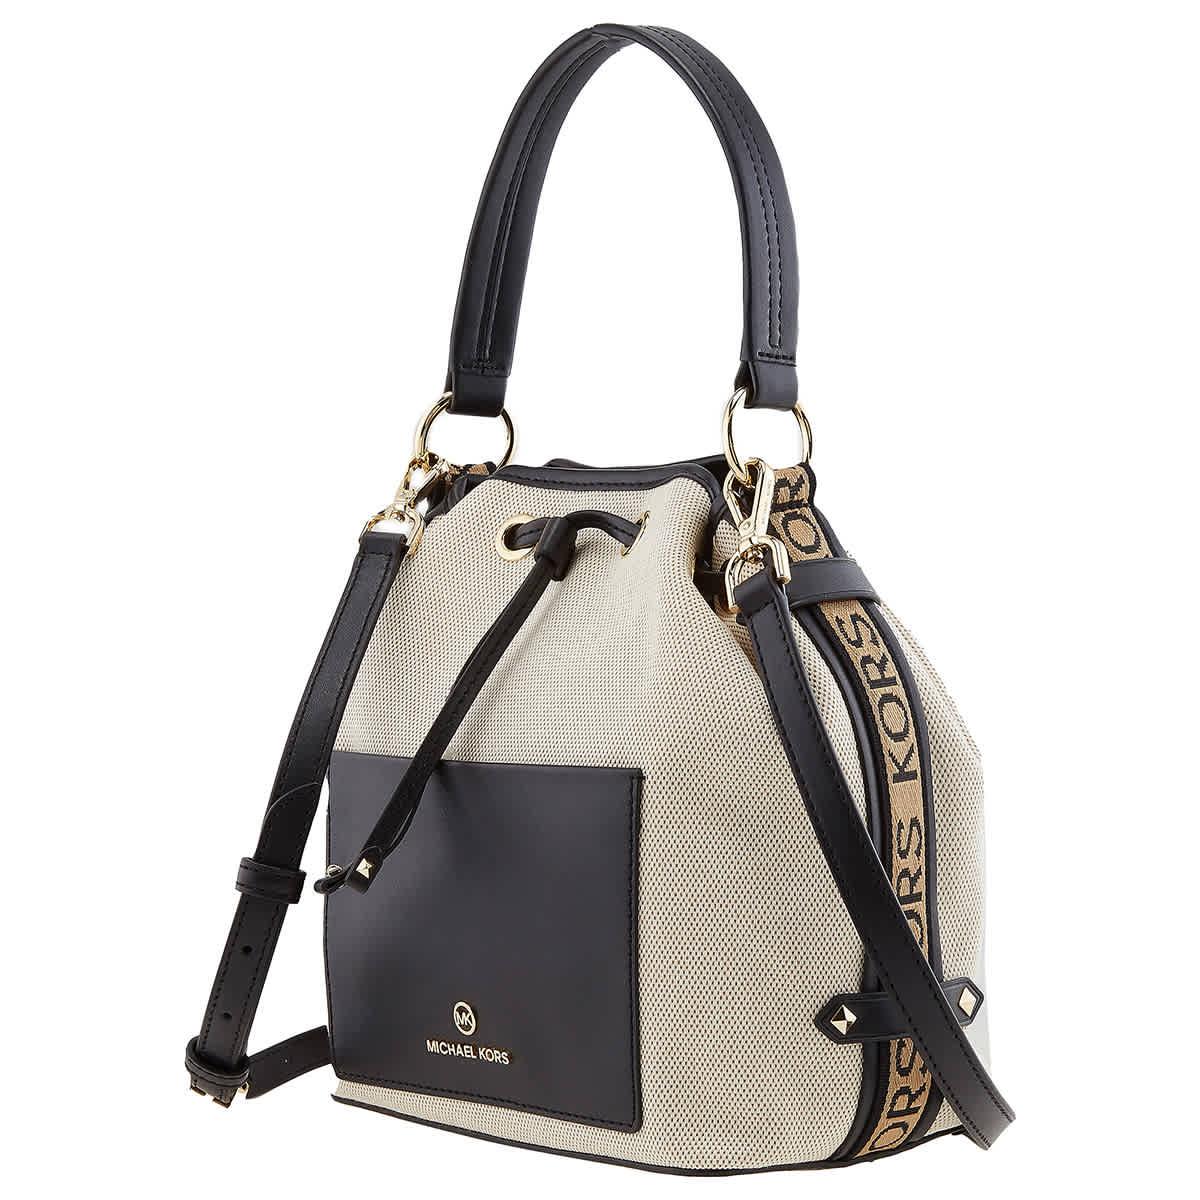 Michael Kors Collection Canvas & Leather Bucket Bag in Black